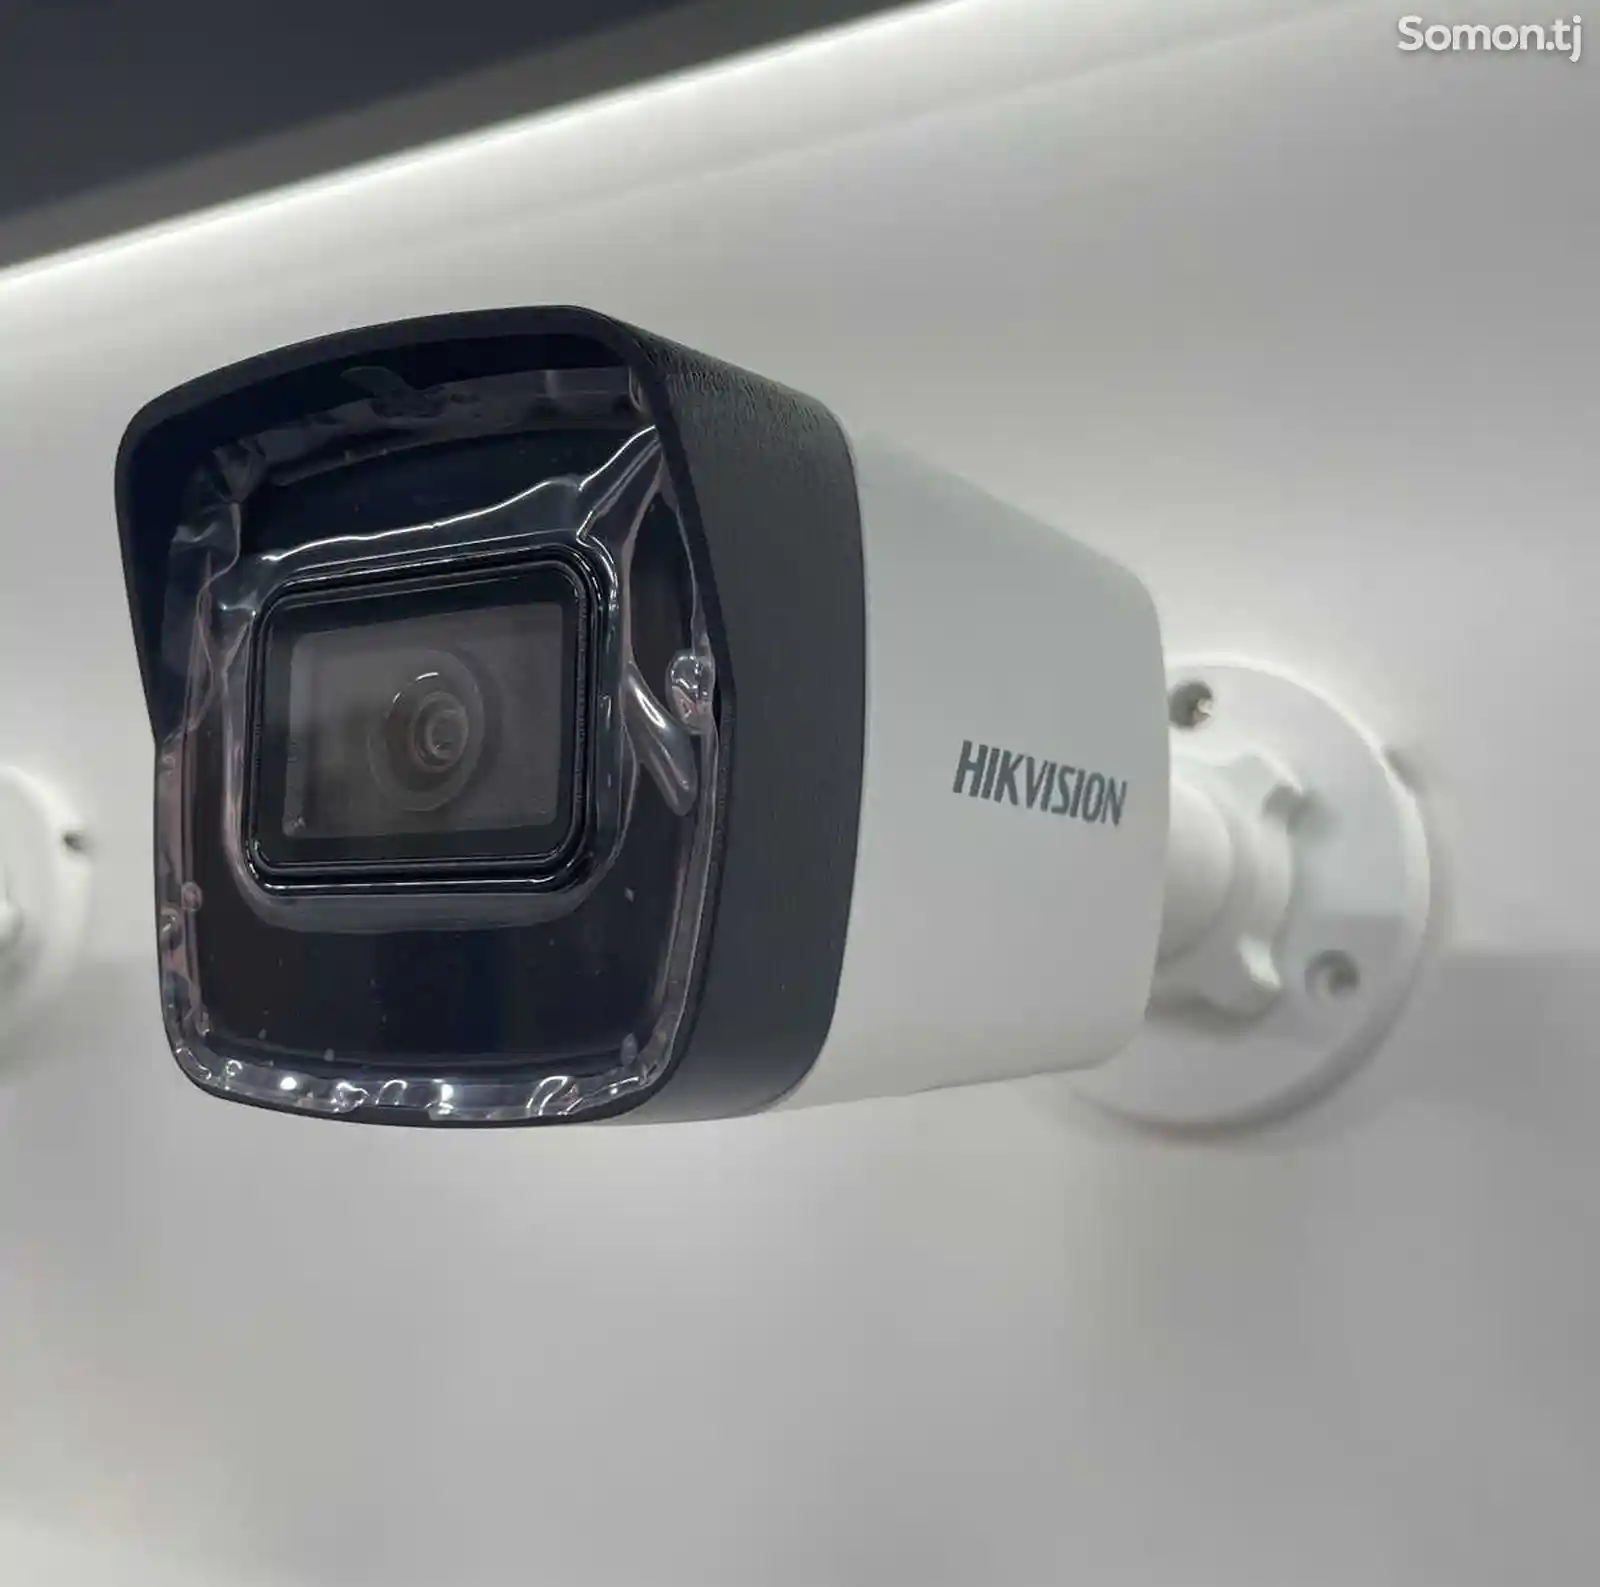 Камера Hikvision DS-2CD1053G0-I